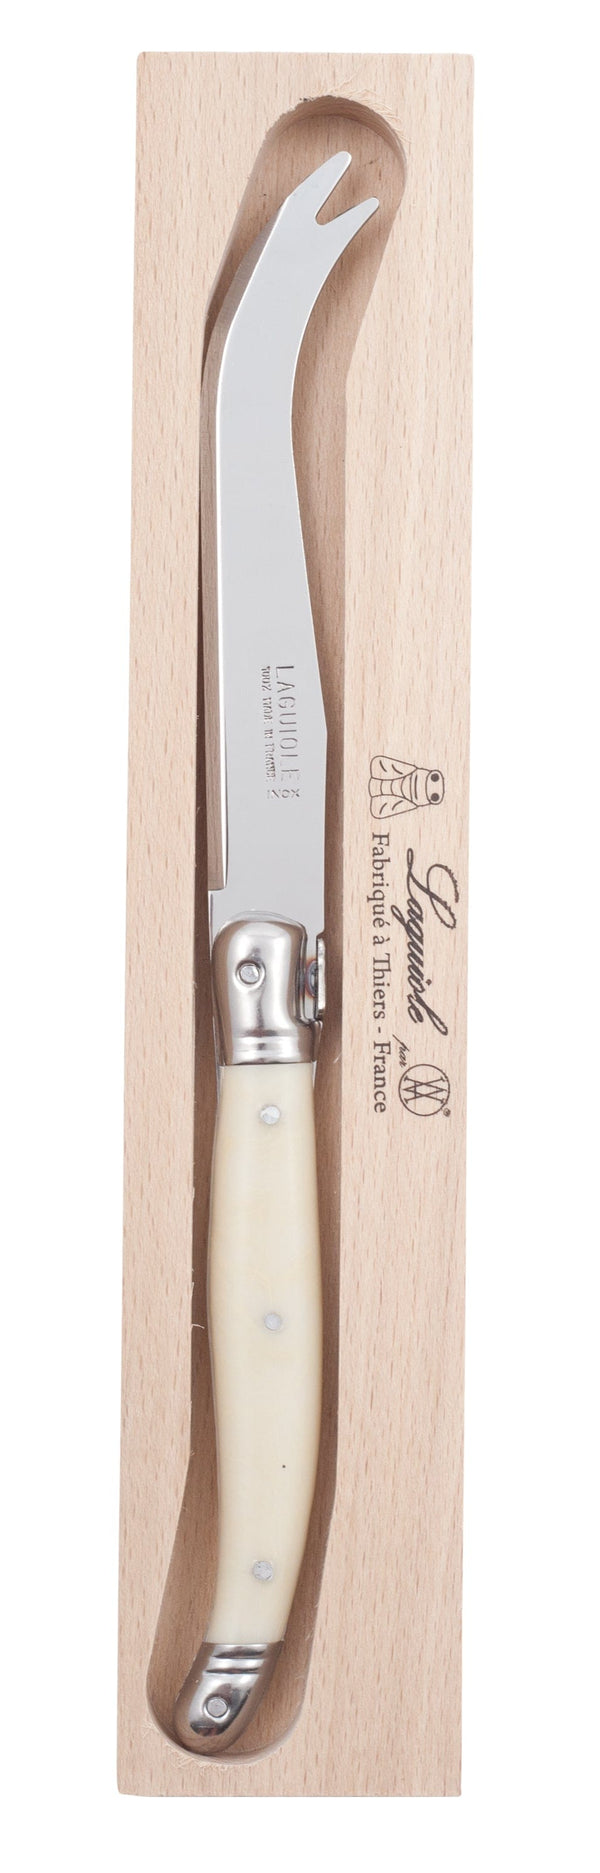 Andre Verdier Kitchenware Laguiole Cheese Knife Boxed